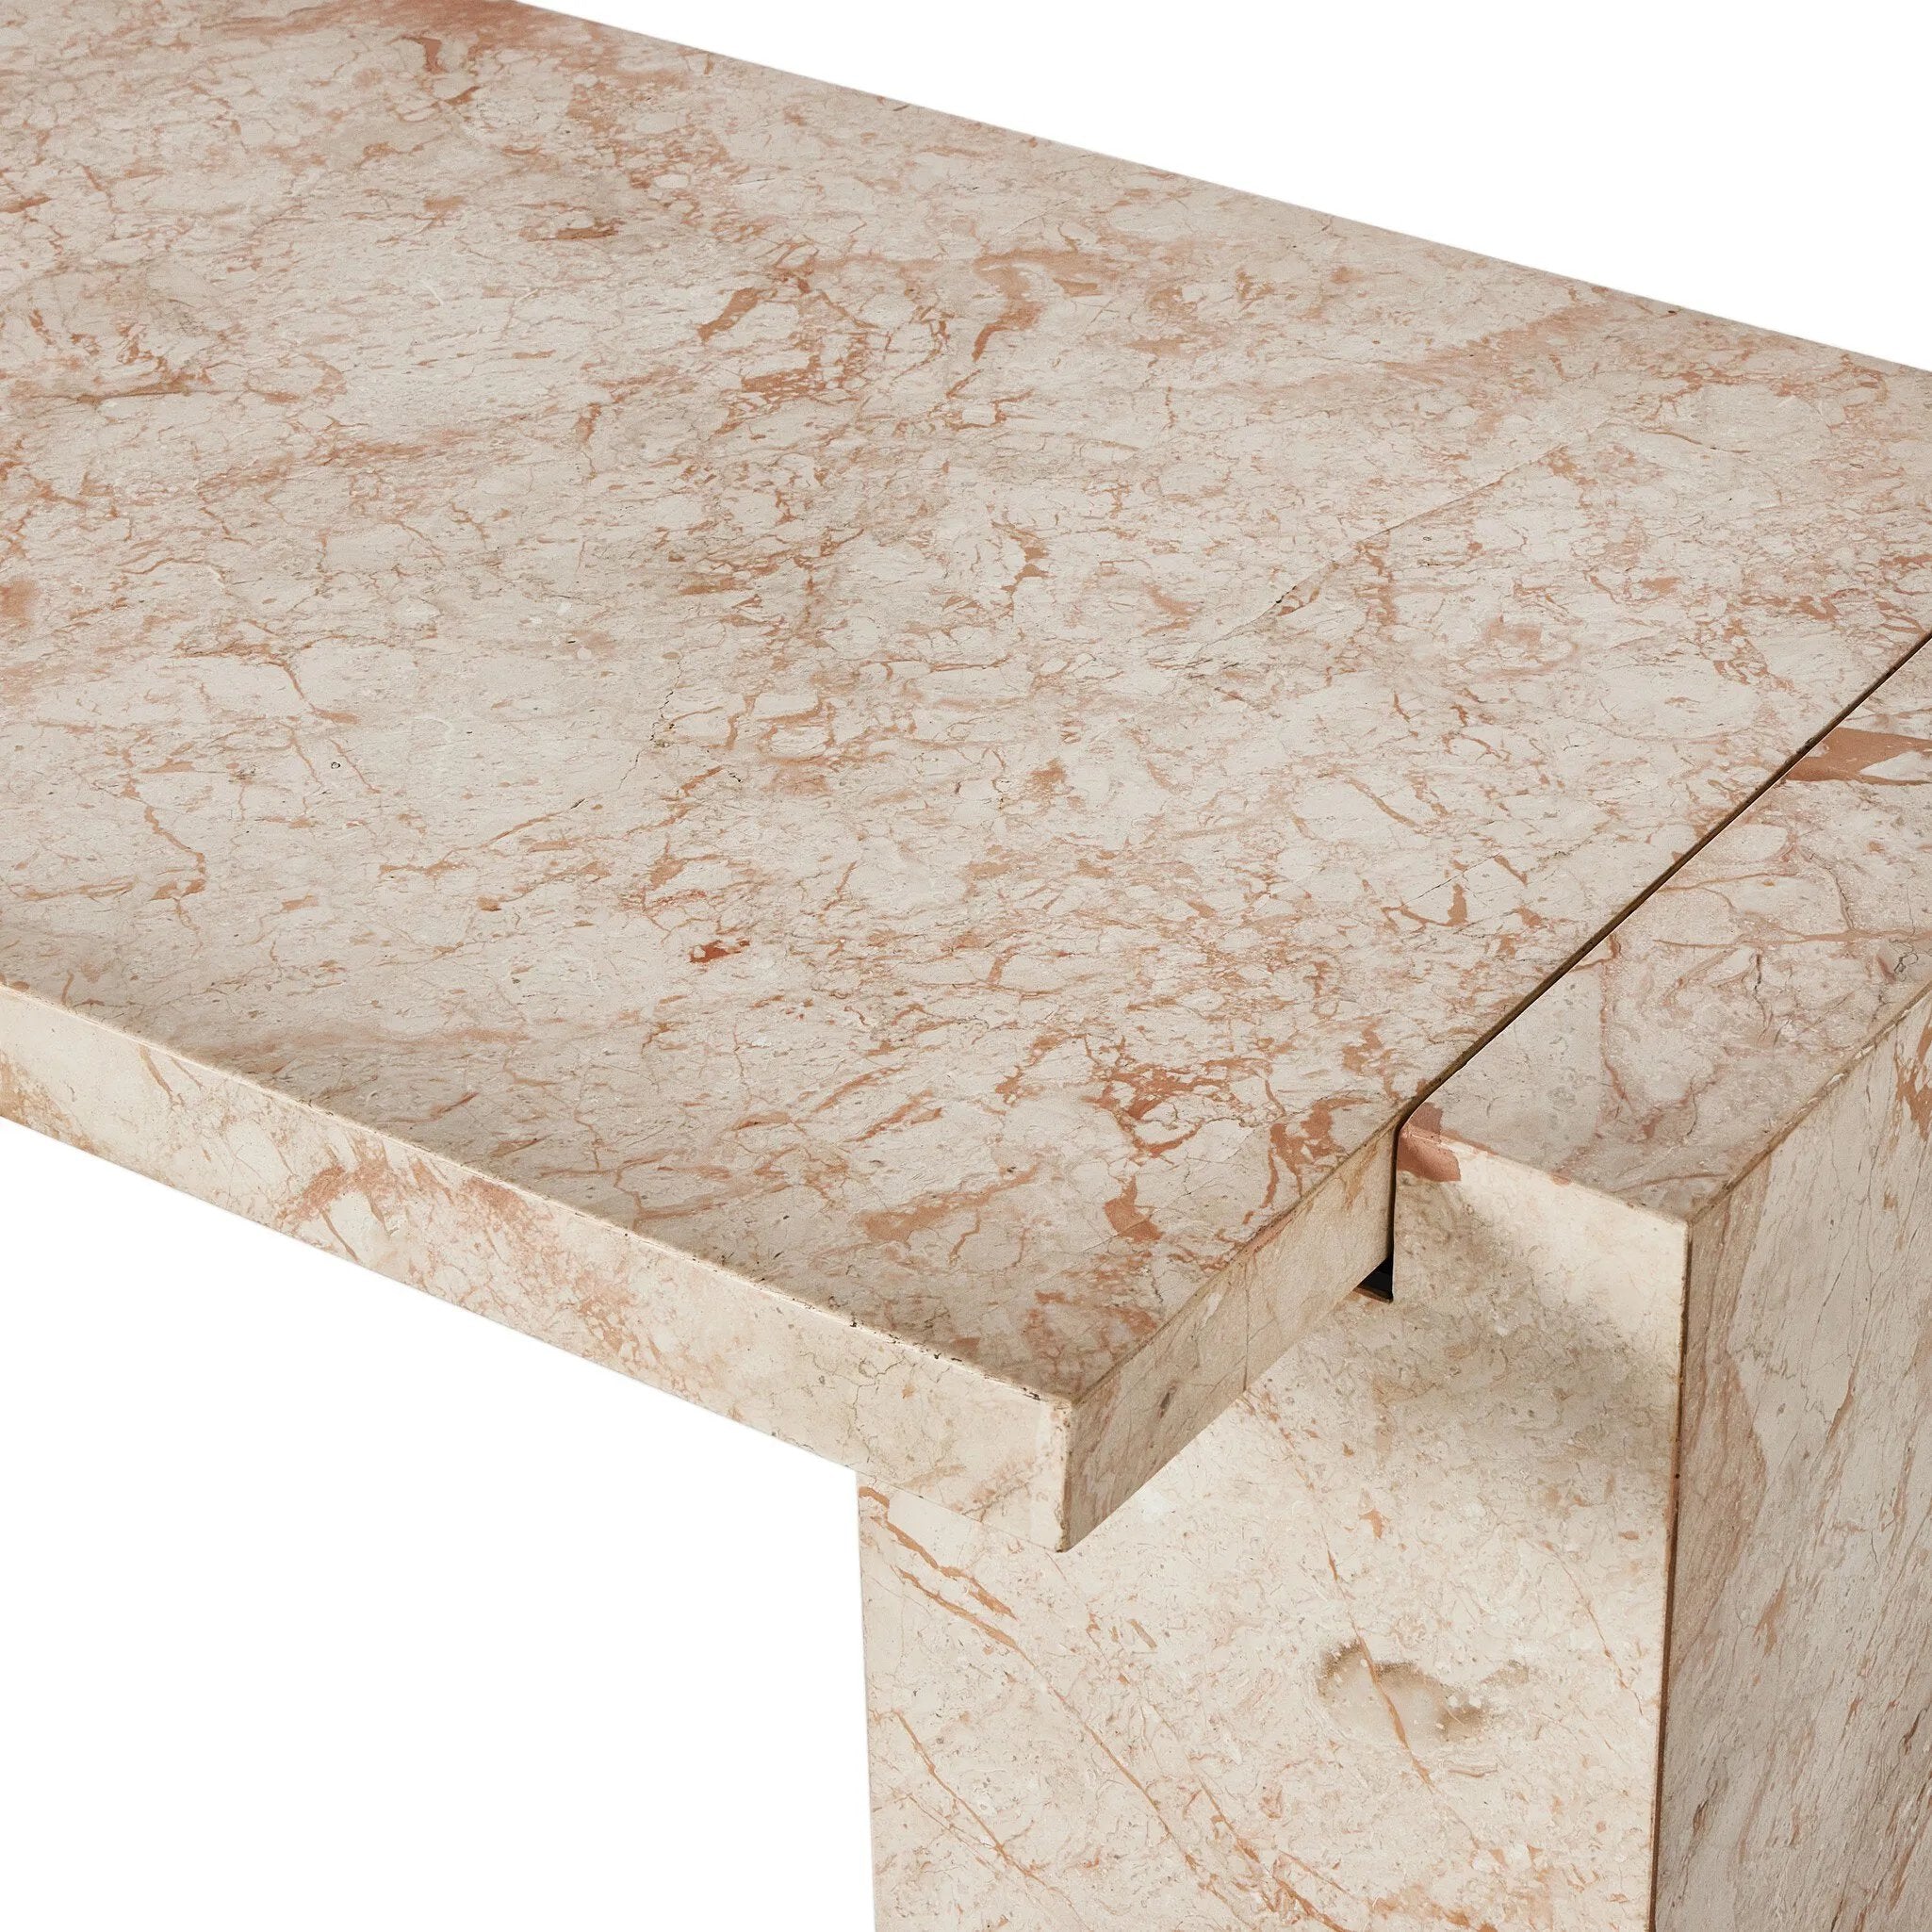 Solid marble sheets are laminated to create cubed cradle bases for a thick-cut tabletop. Heavy veining and natural swirls speak to the nature of marble, with each piece being entirely unique.Collection: Elemen Amethyst Home provides interior design, new home construction design consulting, vintage area rugs, and lighting in the Nashville metro area.